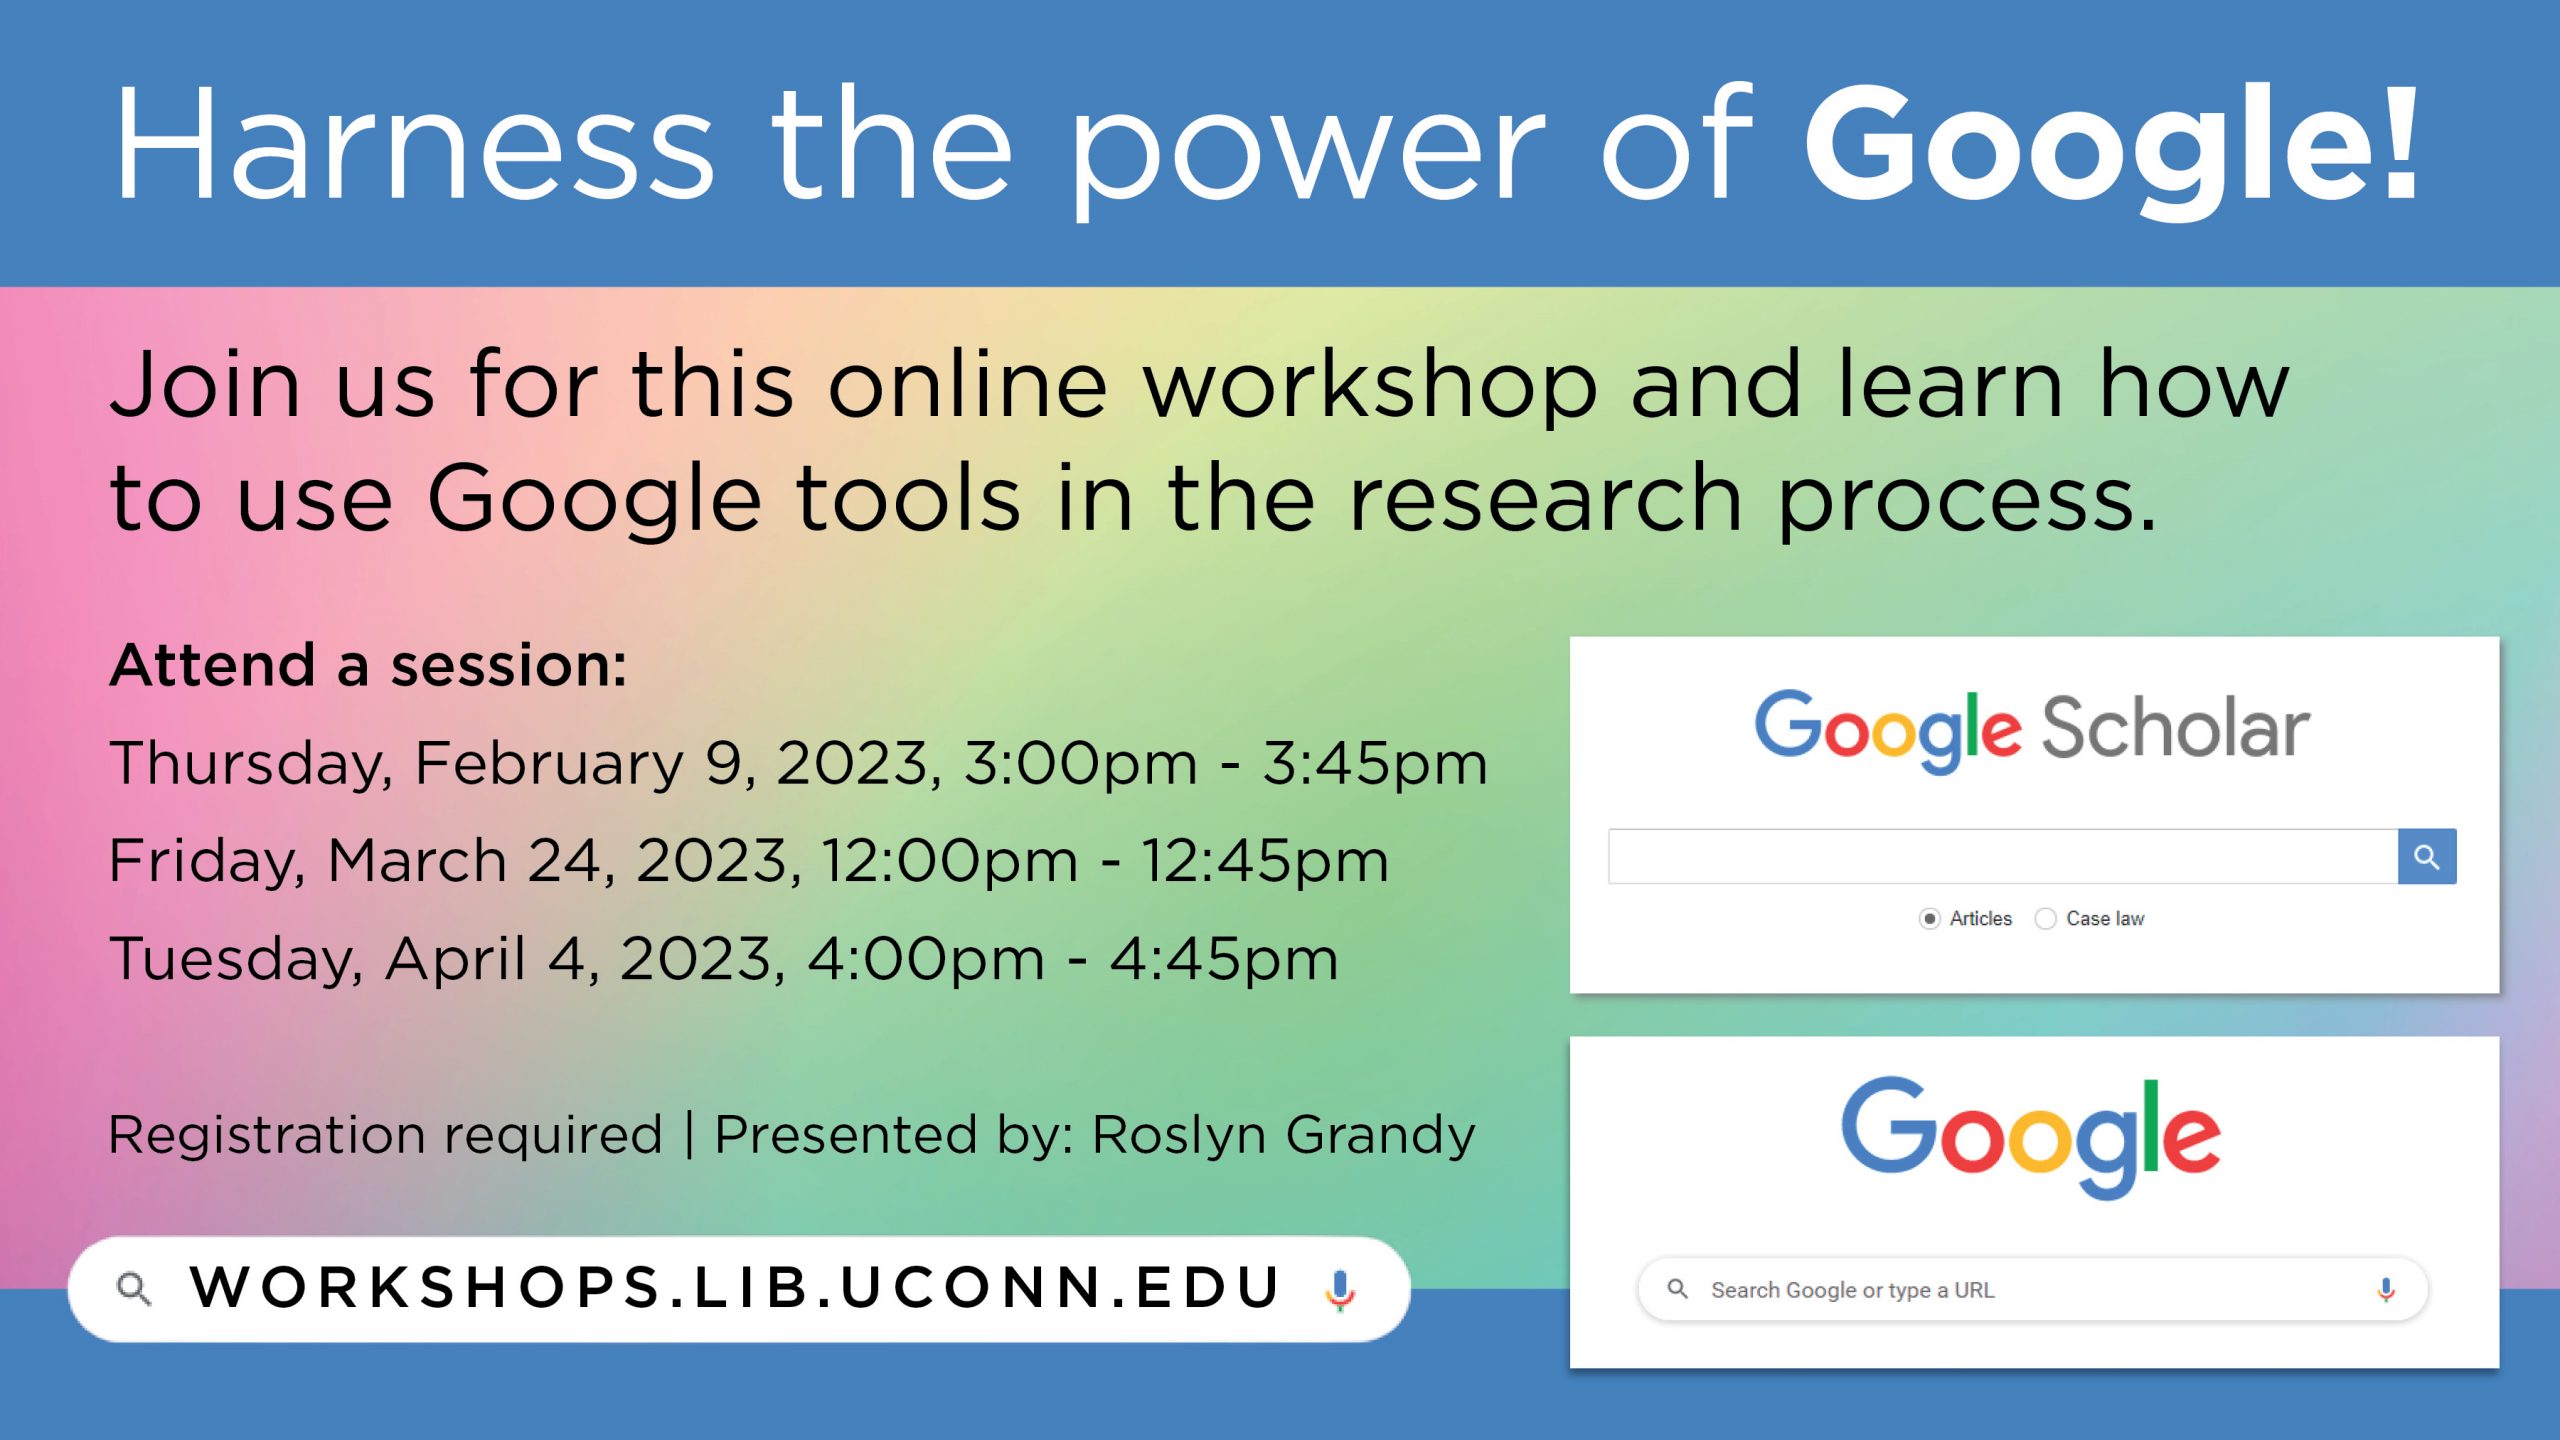 Marketing image with a rainbow gradient background and images of the Google and Google Scholar website search page, and the text: Harness the power of Google! Join us for this online workshop and learn how to use Google tools in the research process. Attend a session: Thursday, February 9, 2023, 3:00pm - 3:45pm; Friday, March 24, 2023, 12:00pm - 12:45pm; Tuesday, April 4, 2023, 4:00pm - 4:45pm. Registration required | Presented by: Roslyn Grandy. workshops.lib.uconn.edu